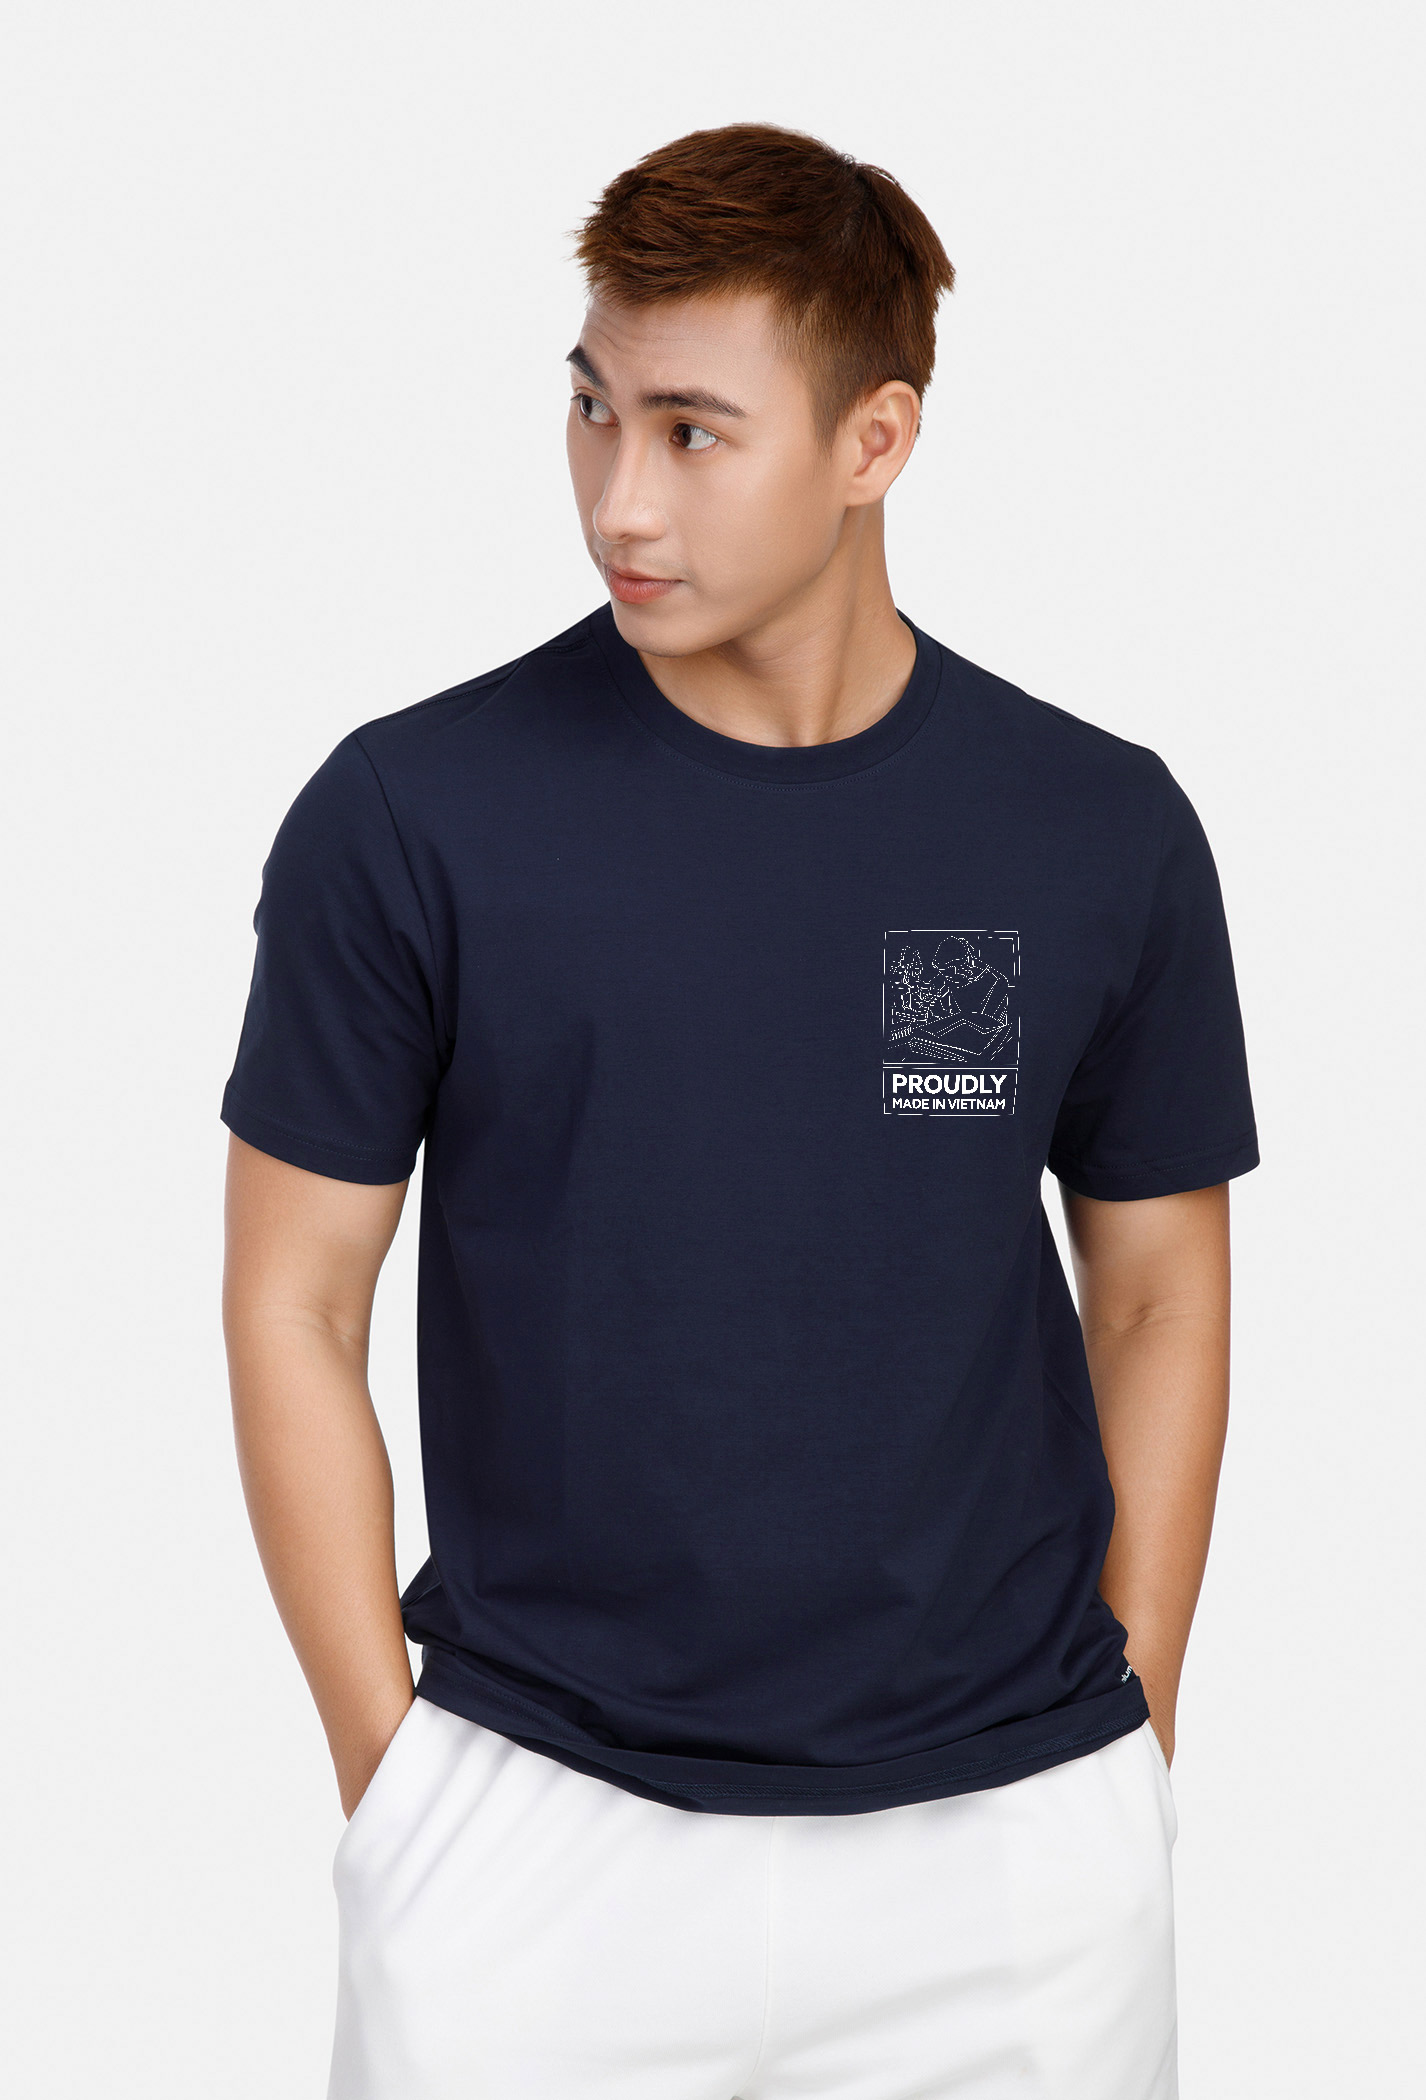   Proudly | Áo thun Cotton Compact "See me: Sewing" in nét xanh-navy 1